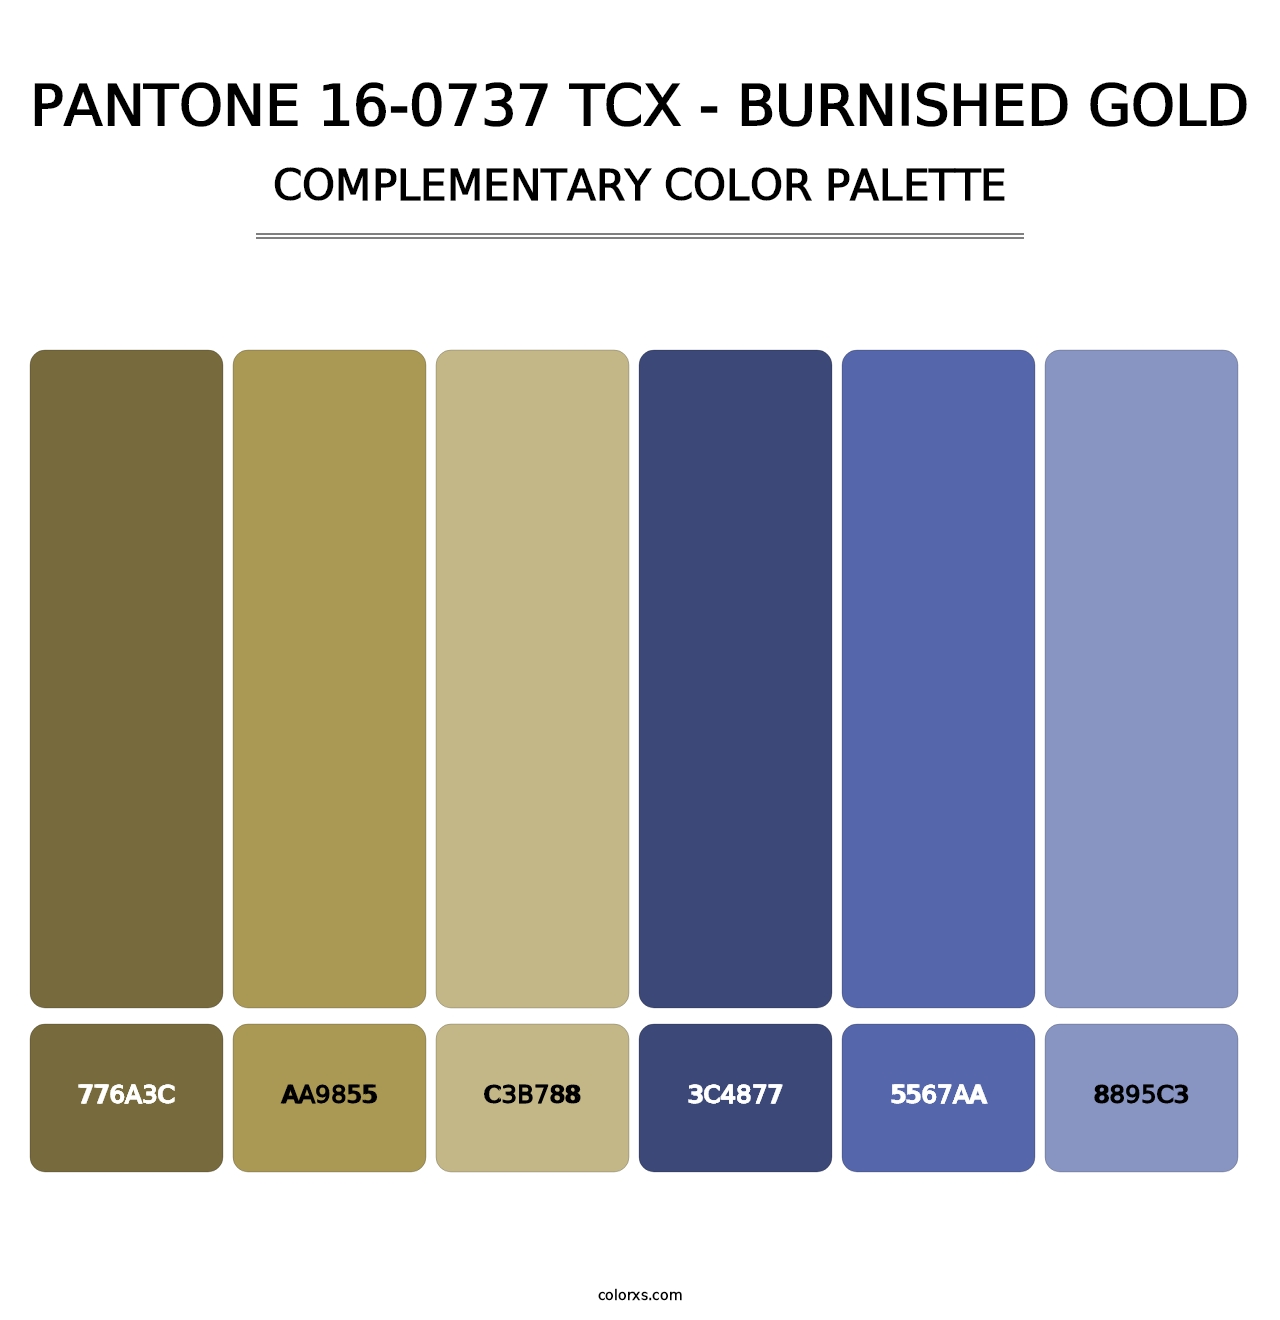 PANTONE 16-0737 TCX - Burnished Gold - Complementary Color Palette